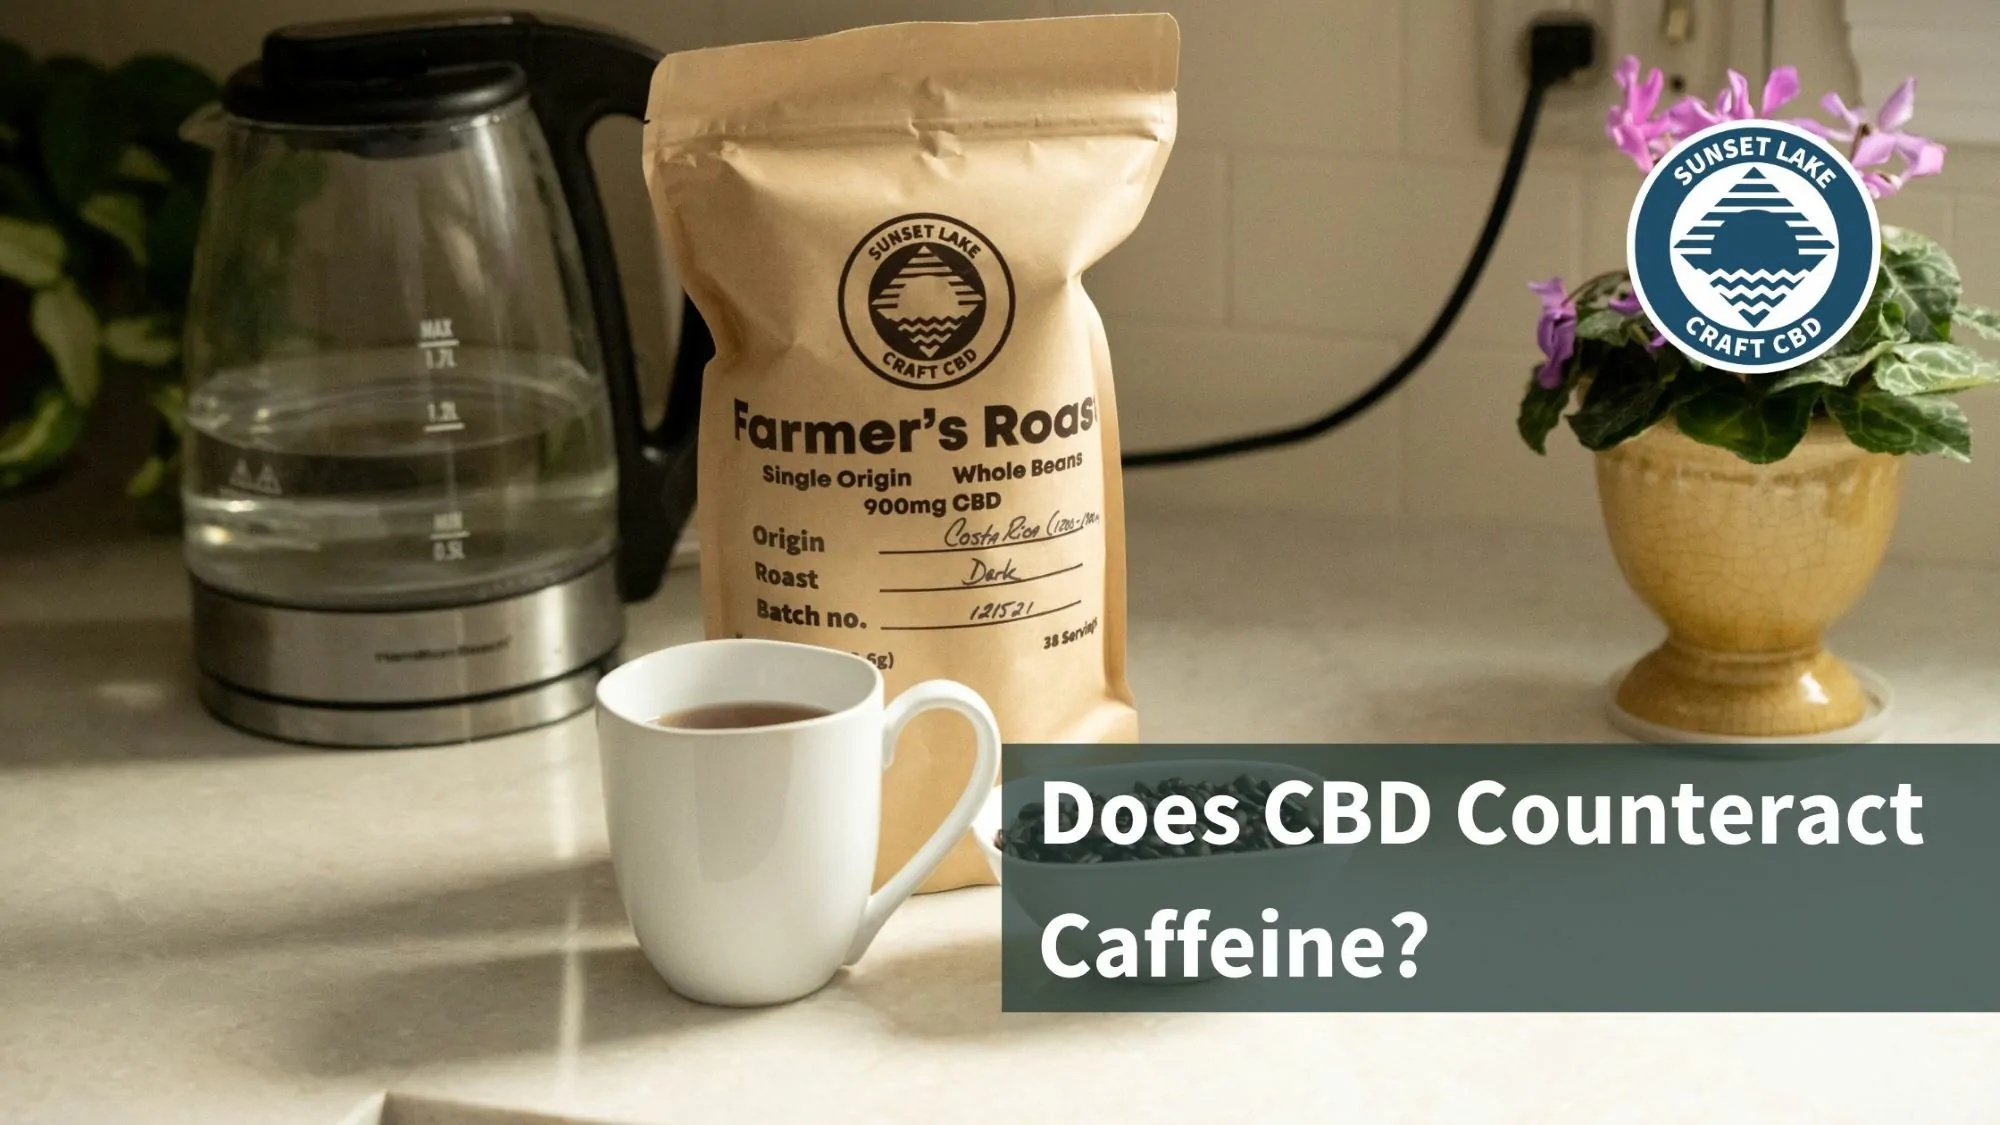 A steaming cup of CBD Coffee with the text "Does CBD Counteract Caffeine?" in the background.